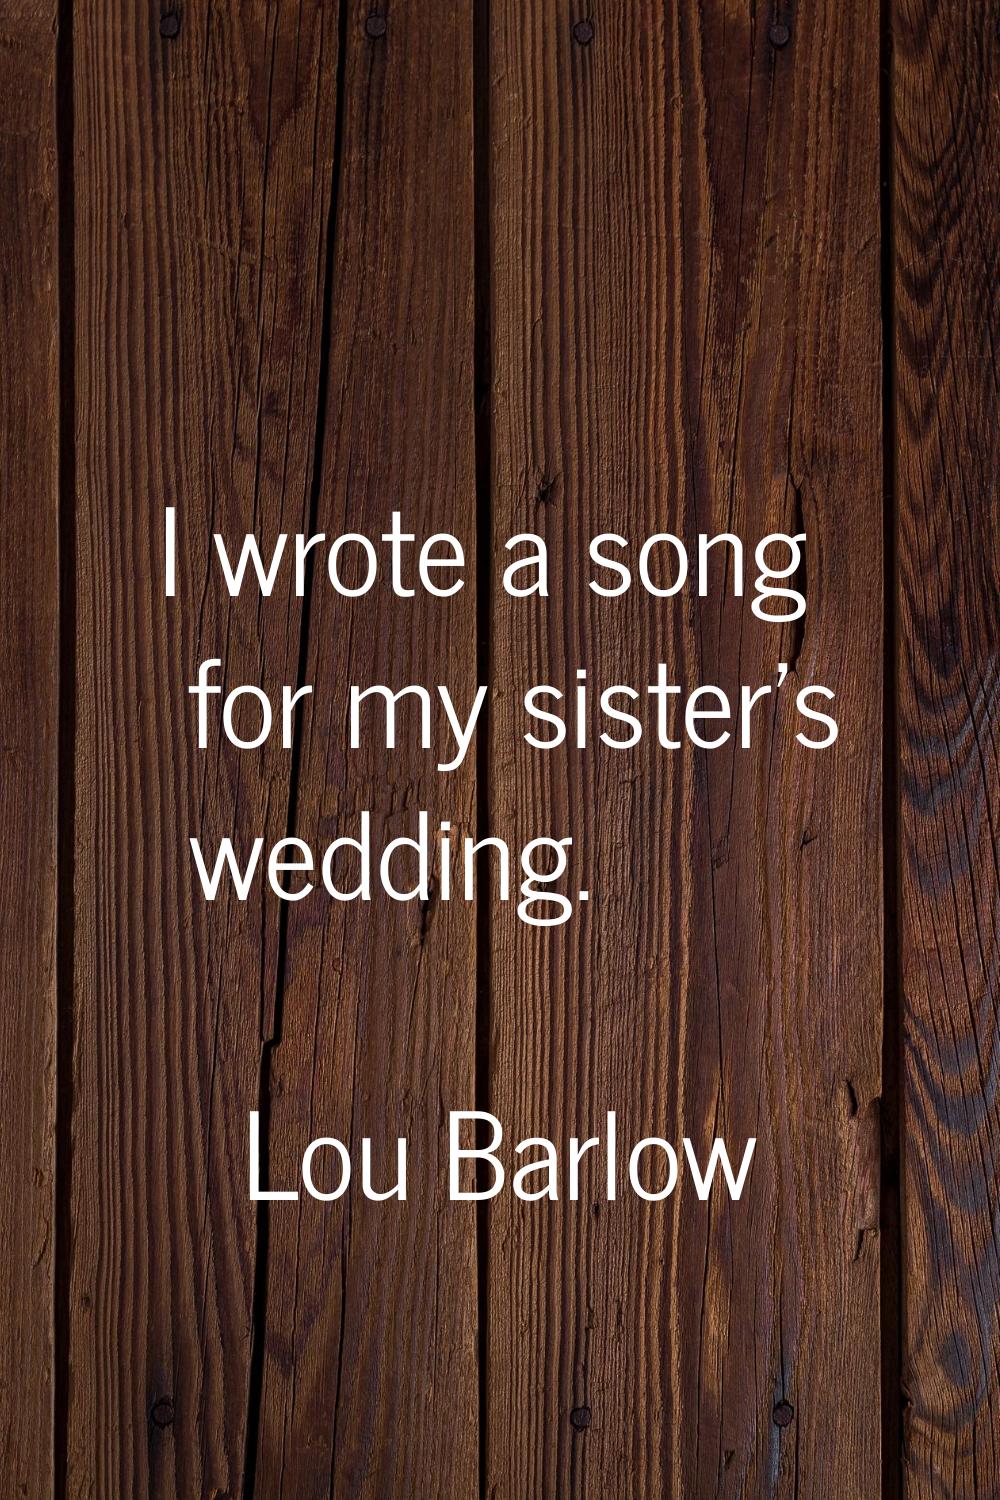 I wrote a song for my sister's wedding.